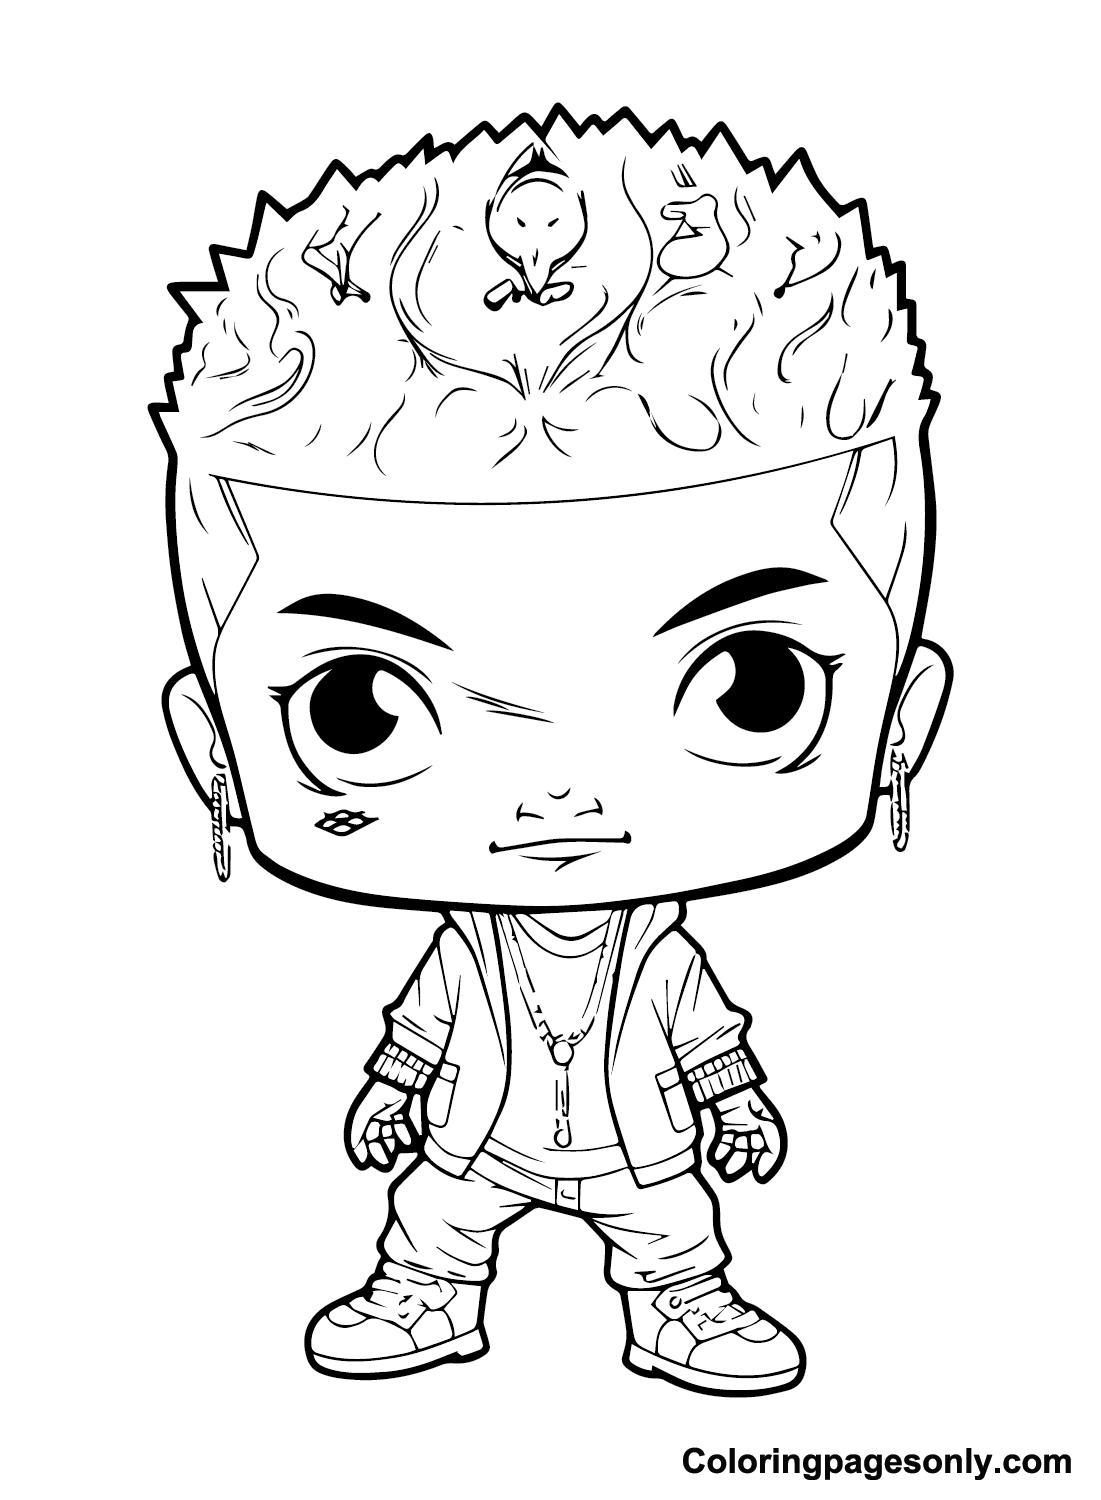 Chibi Blueface Coloring Page